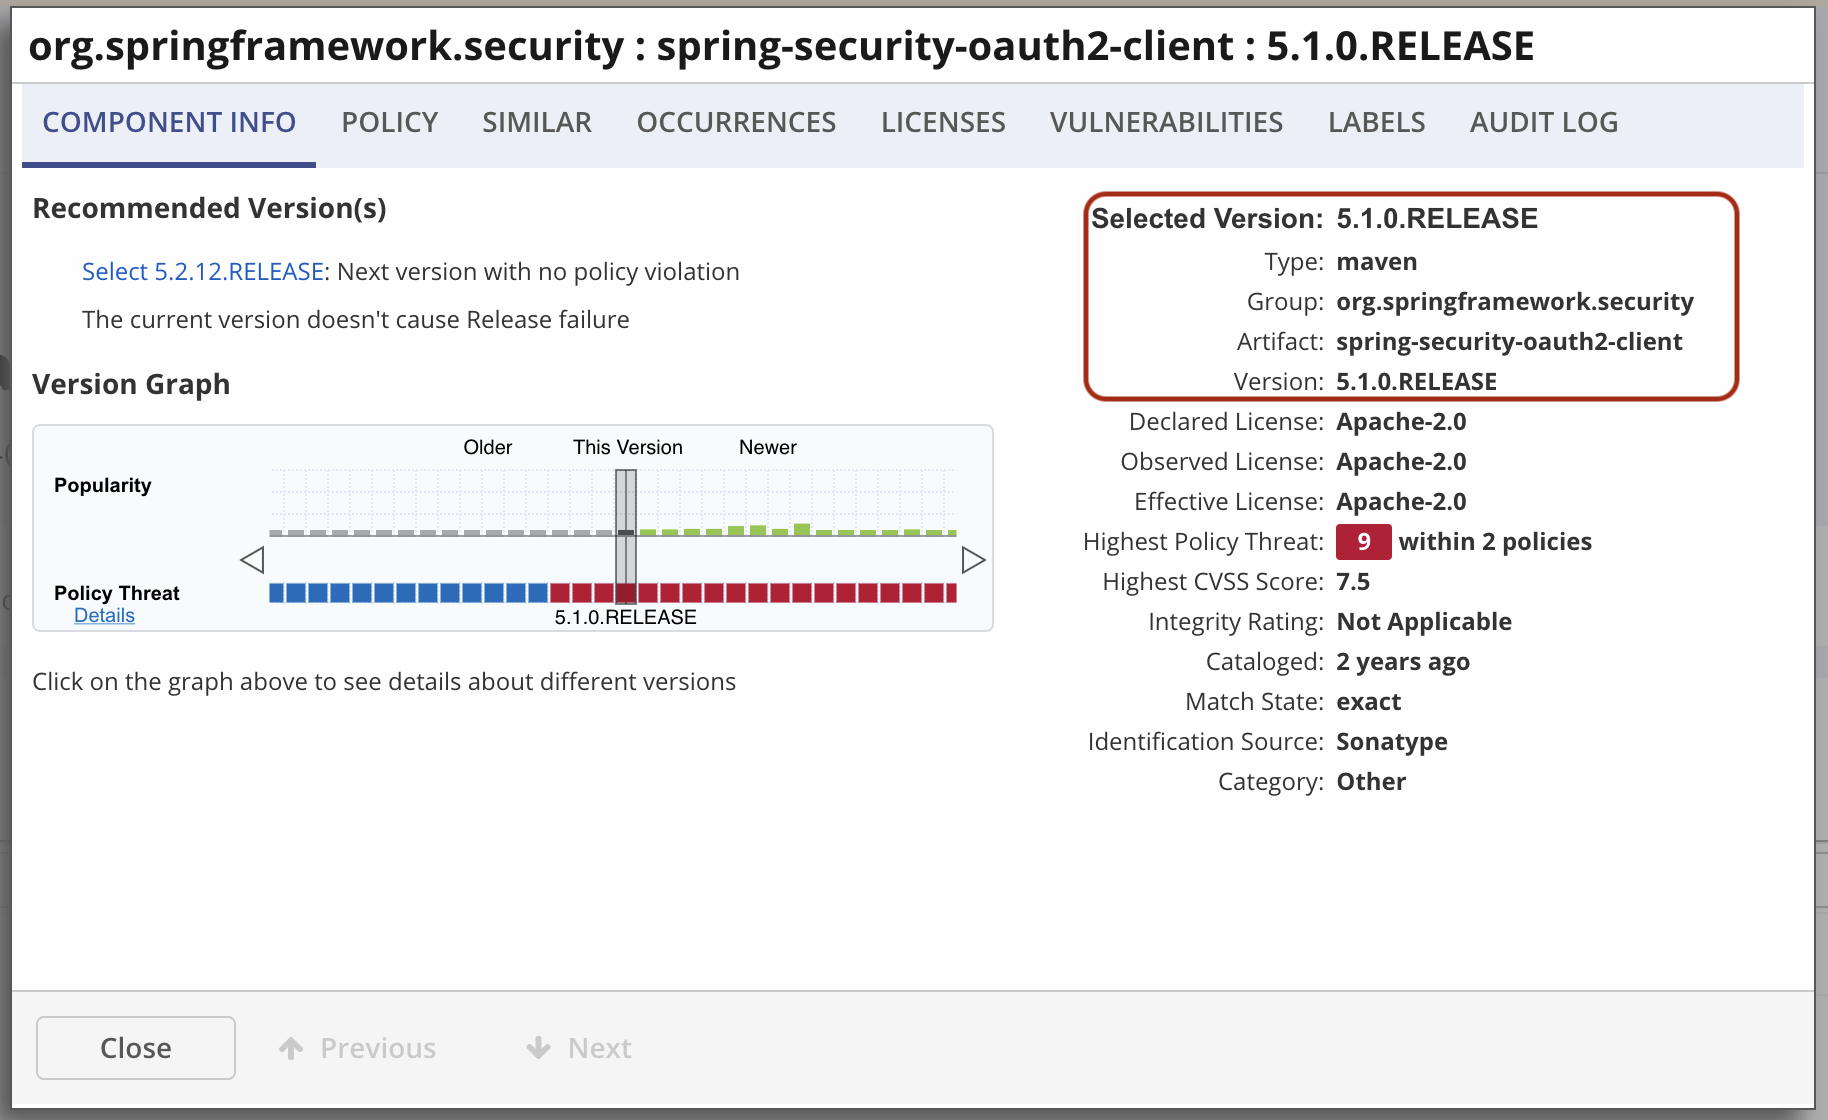 spring-security-oauth2-client version 5.1.0.RELEASE being flagged as vulnerable